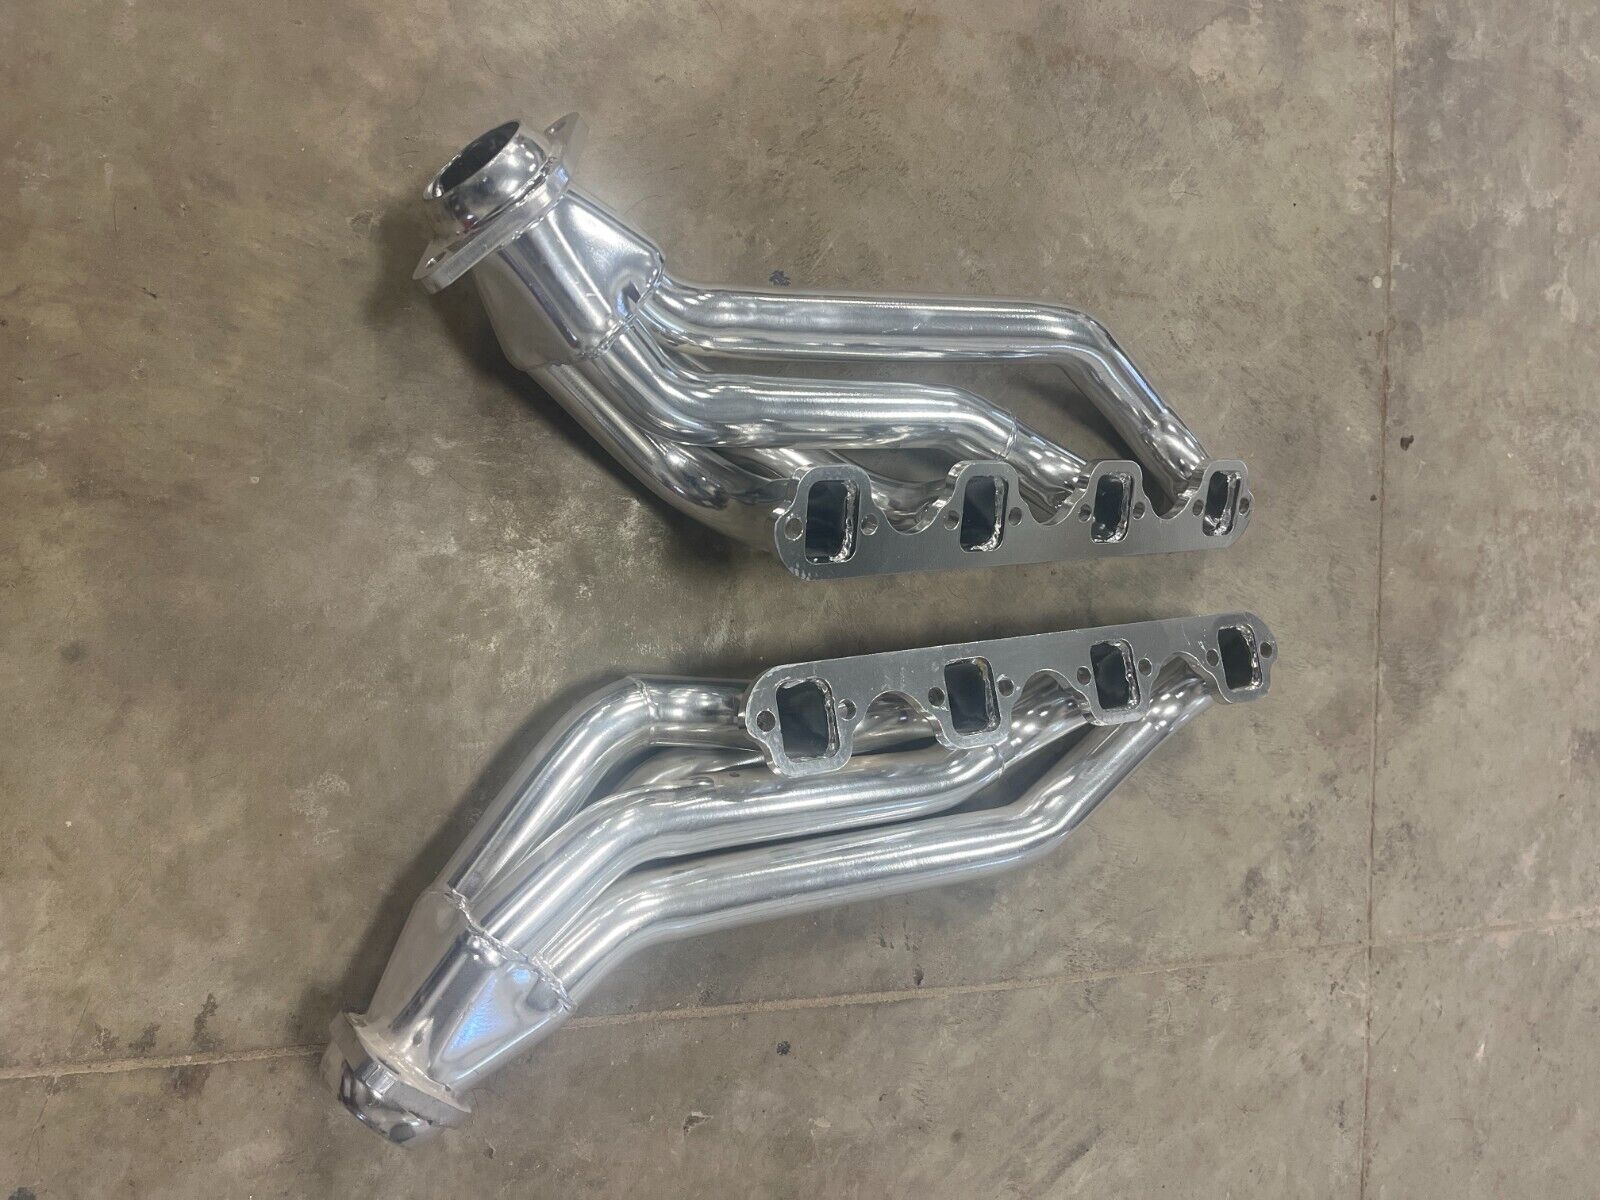 Exhaust Header-Shorty Headers SCOTT DRAKE fits 64-70 Ford Mustang